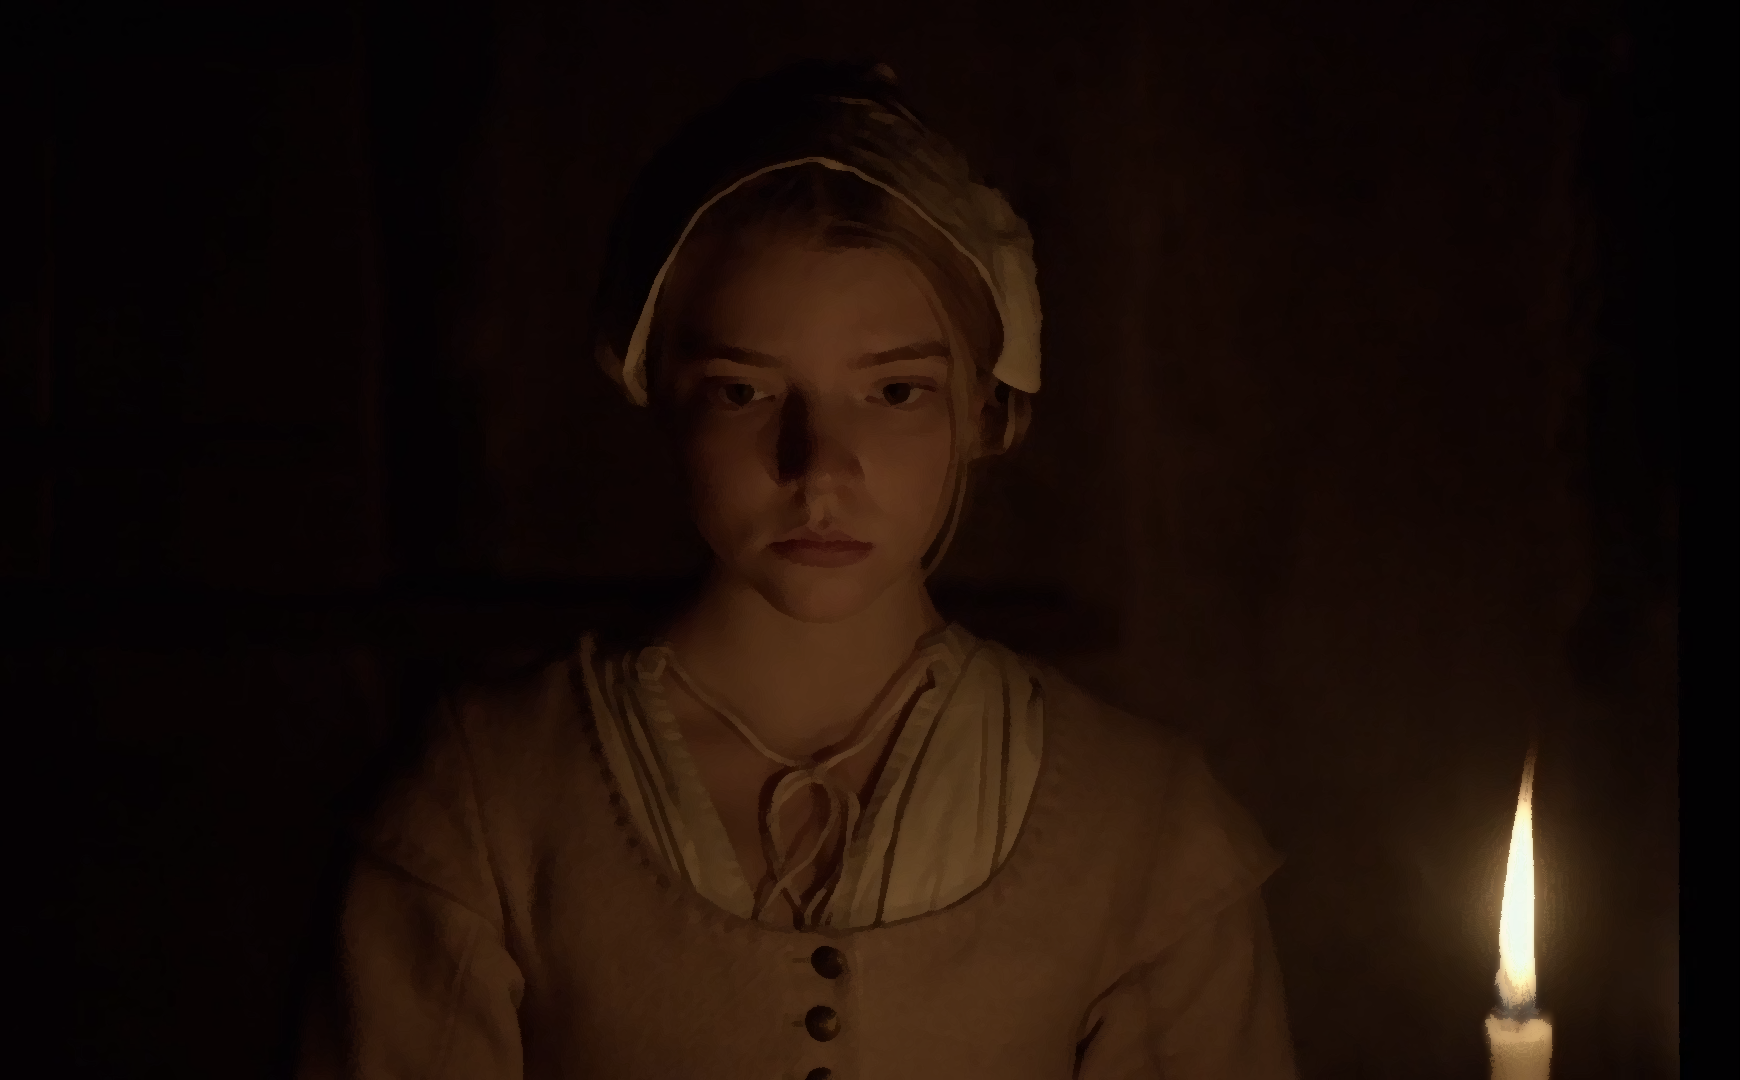 ‘The Witch’ could stand to trim some fat off this sacrifice.